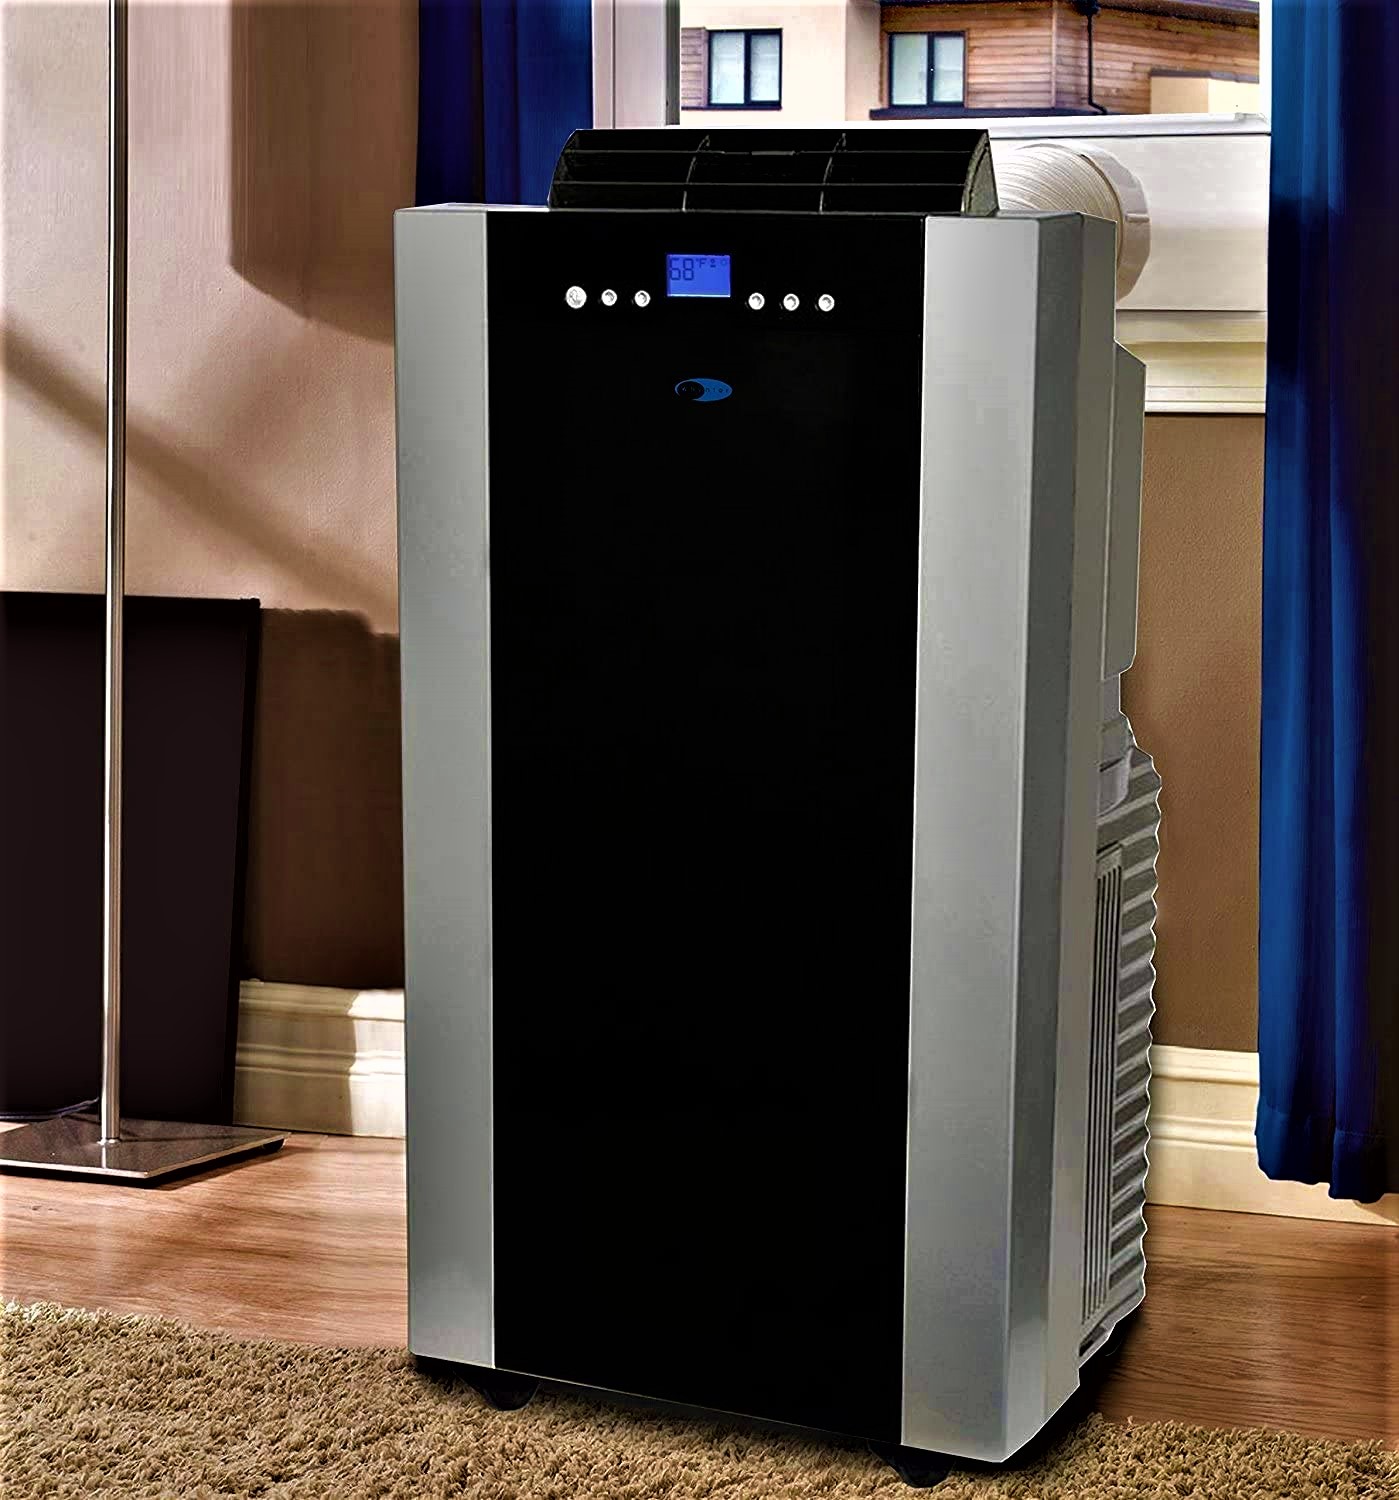 Whynter ARC-14S 14,000 BTU Dual Hose Portable Air Conditioner, Dehumidifier, Fan with Activated up to 500 sq ft room